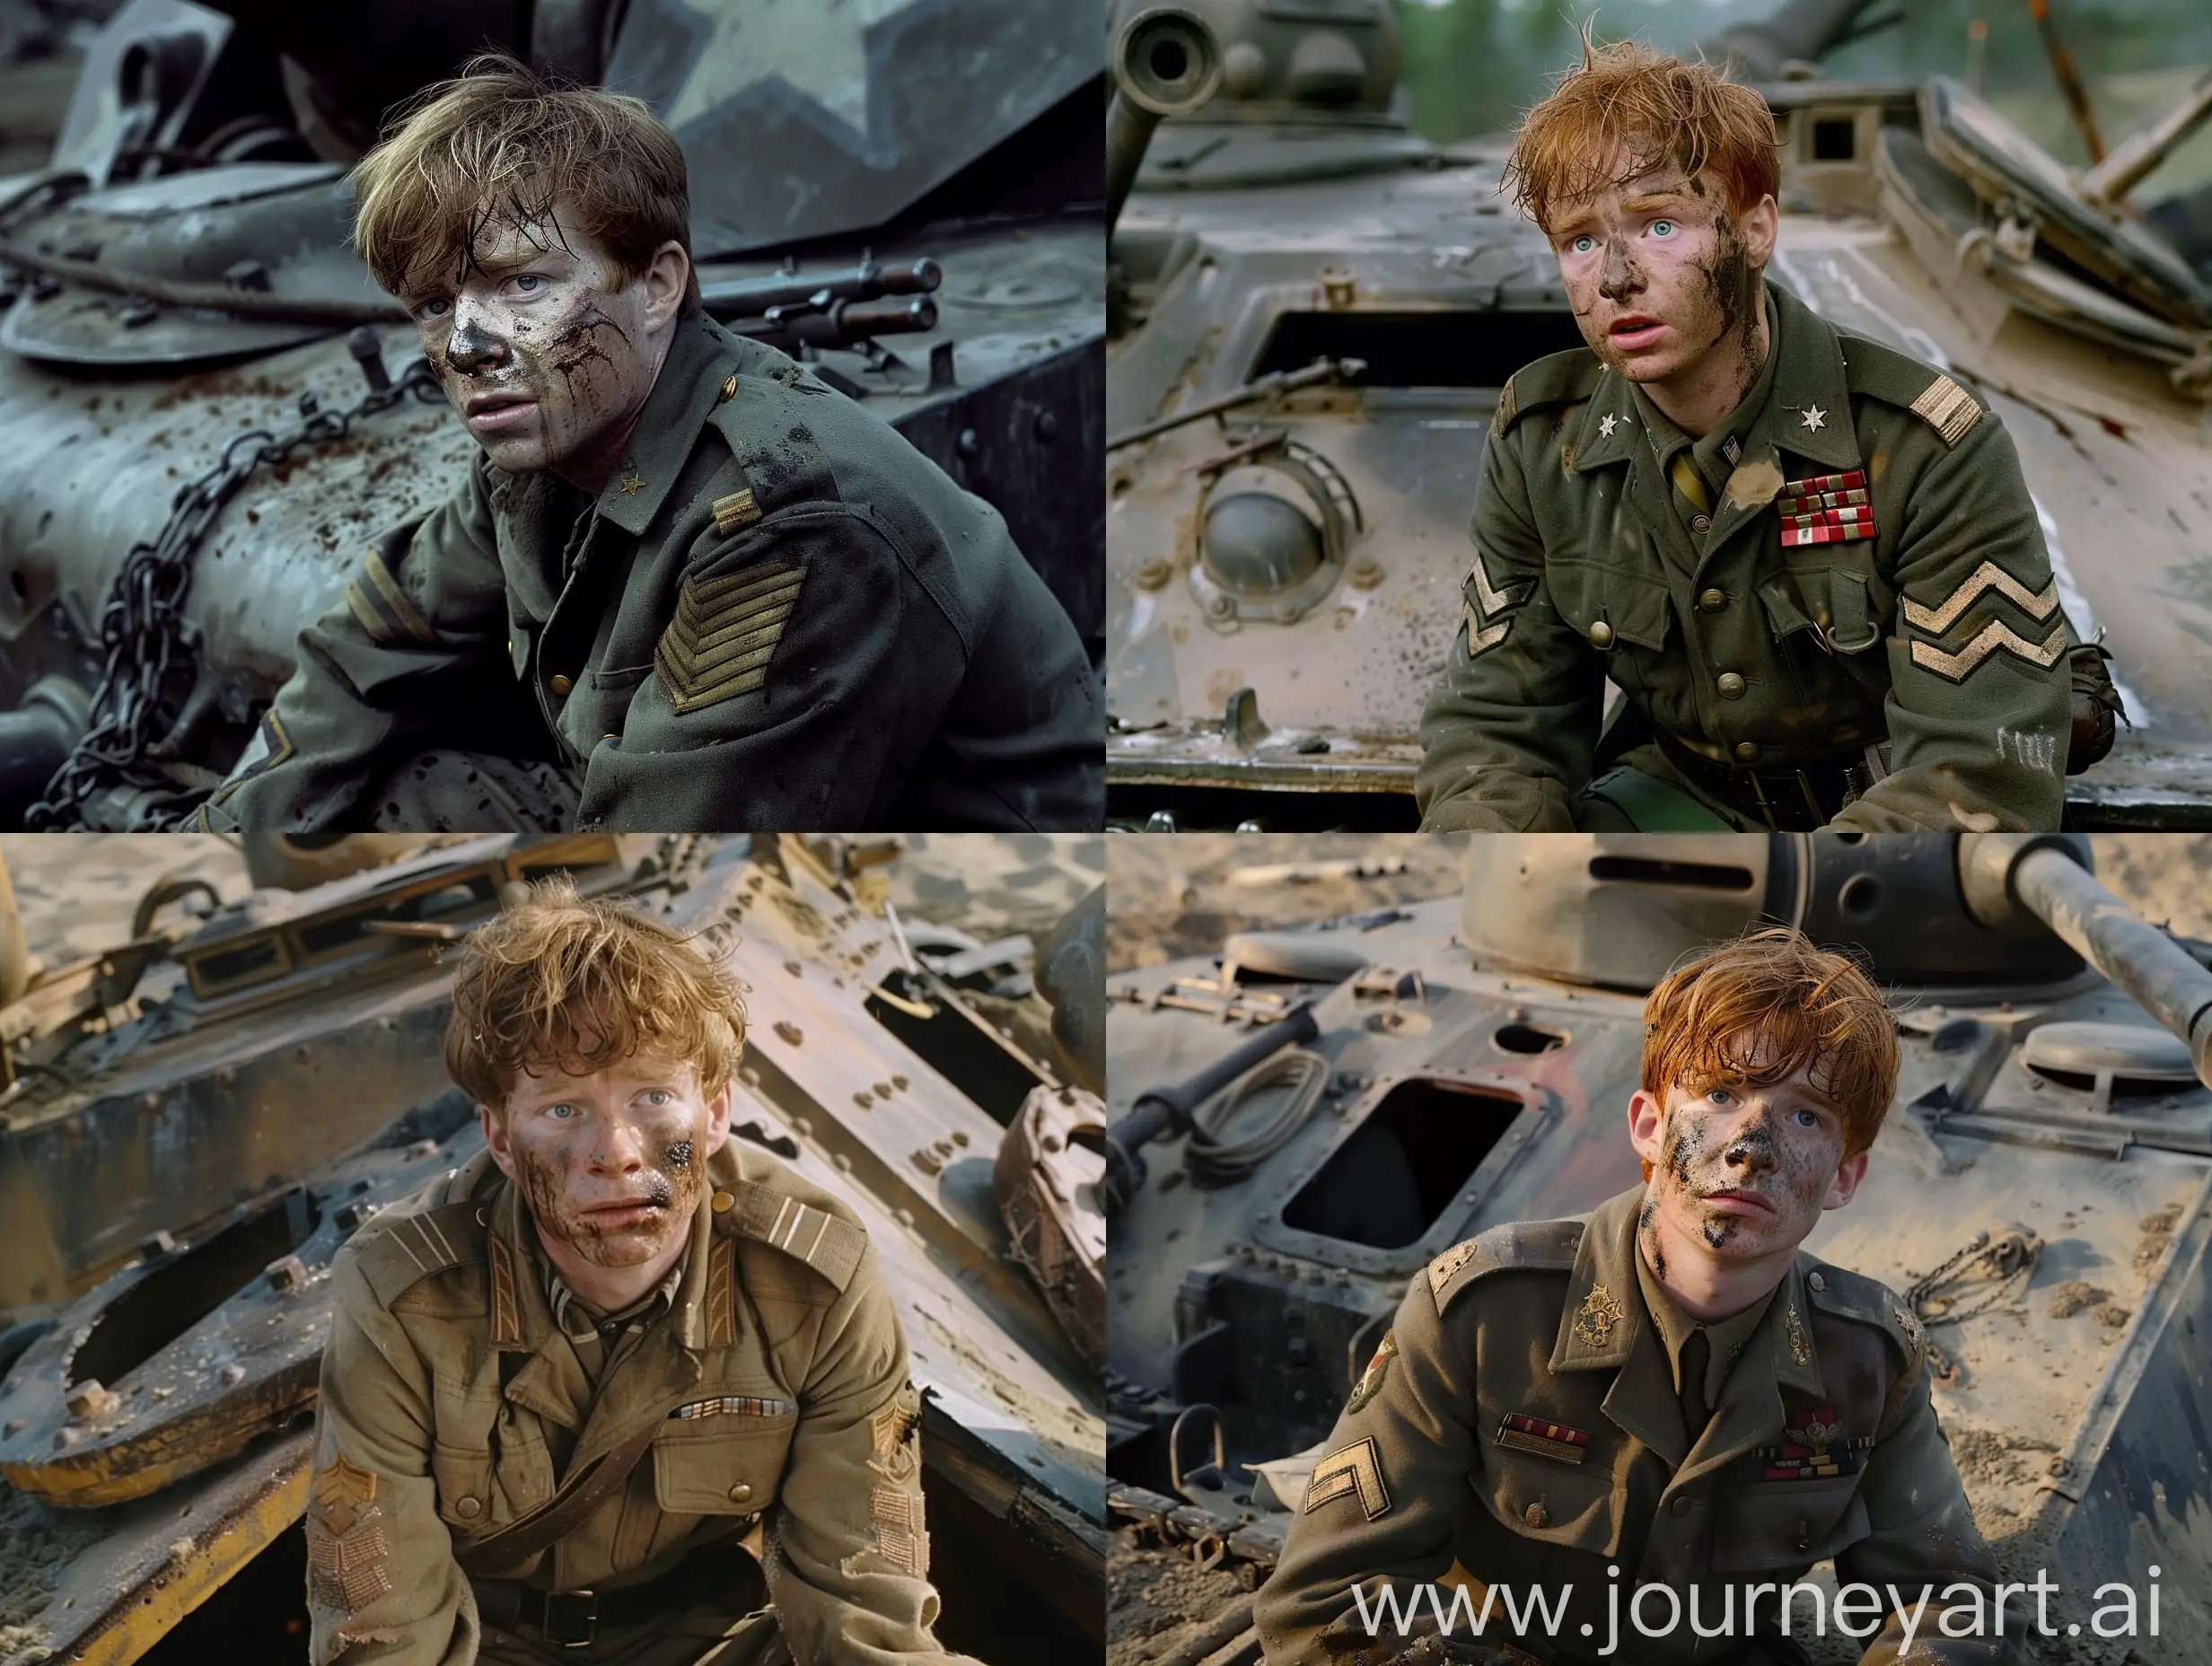 Ron Weasley is in ww2 American military uniform. his face is dirty because of Soot from the explosion. he is sitting on a broken Sherman tank and says,real